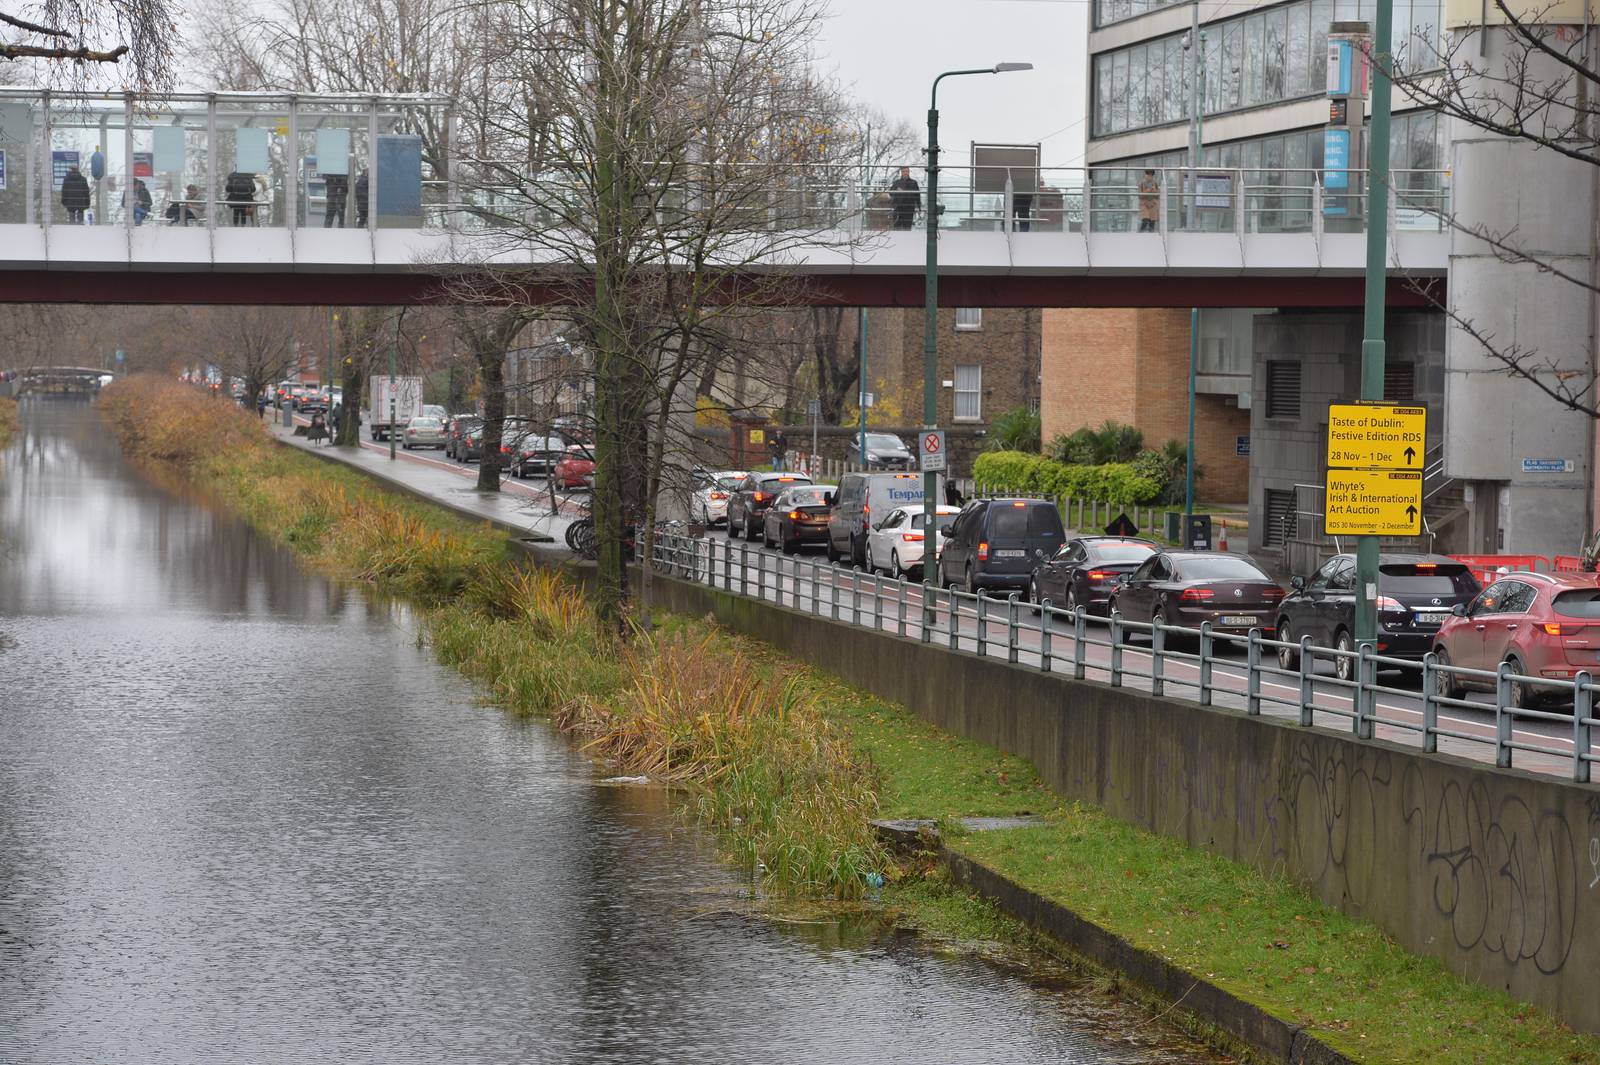 27/11/2019 - NEWS - Backed up Traffic on Dublins Grand Canal near Portobello in Dublin  due to the Tractor Protest by Farmers in Dublin City Centre
Photograph: Alan Betson / The Irish Times